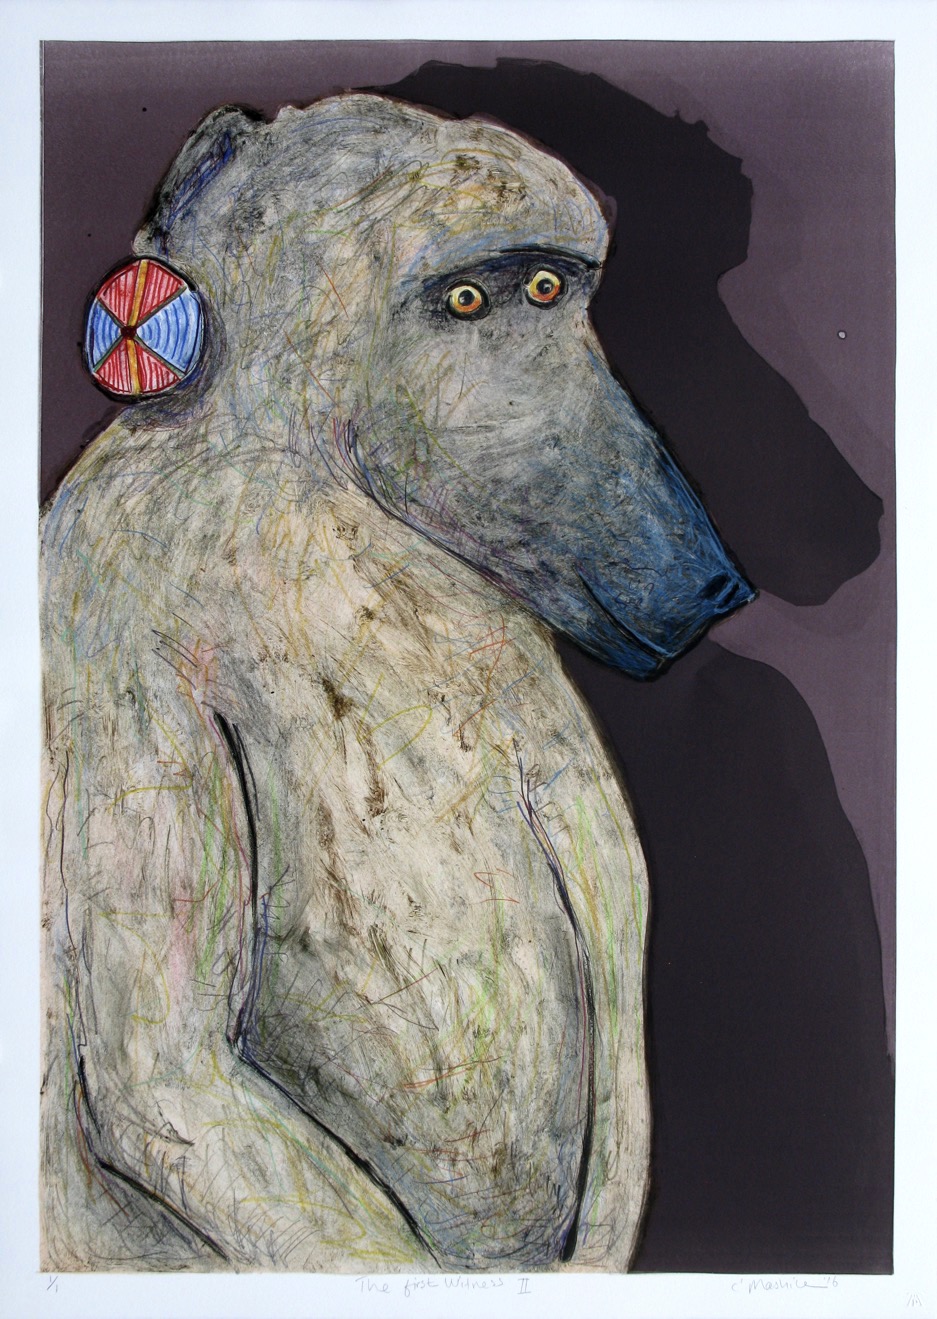 Baboon head and shoulders with shadow. The baboon is wearing a colourful disc earring.